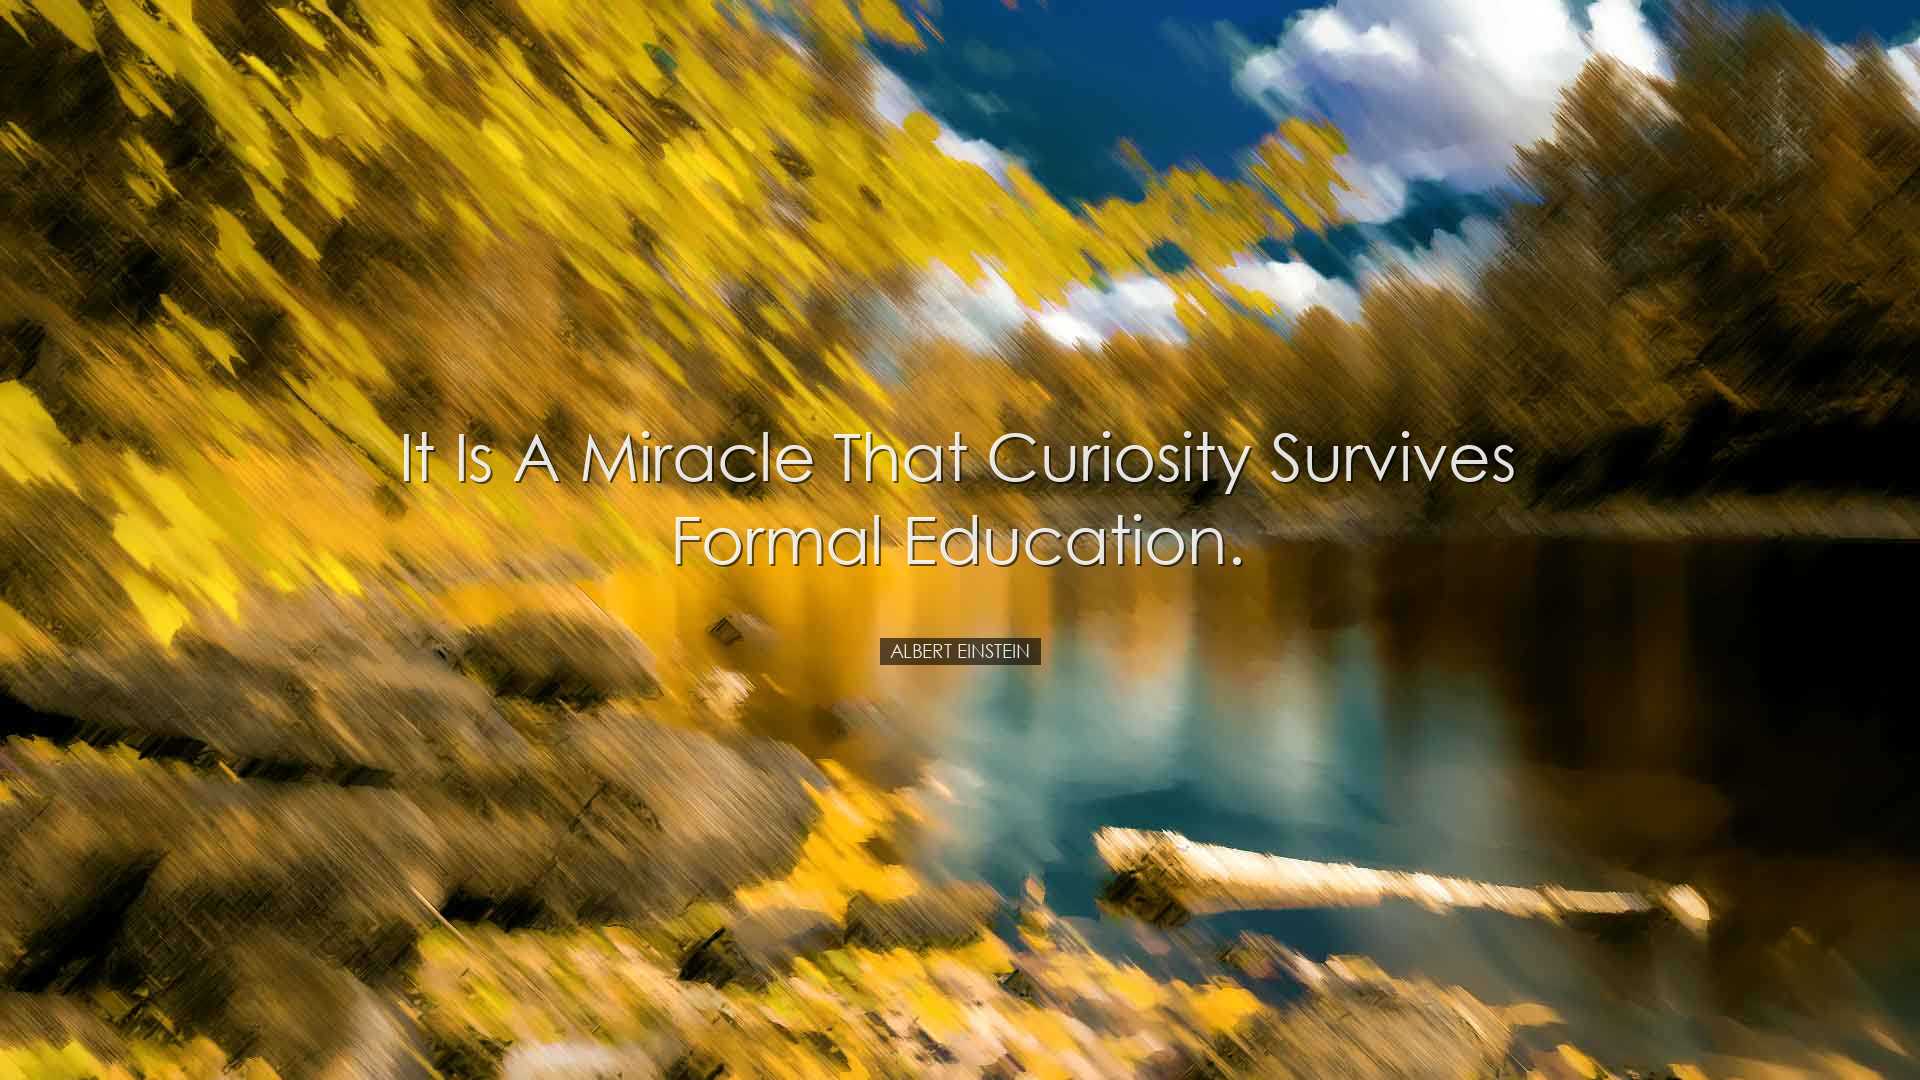 It is a miracle that curiosity survives formal education. - Albert